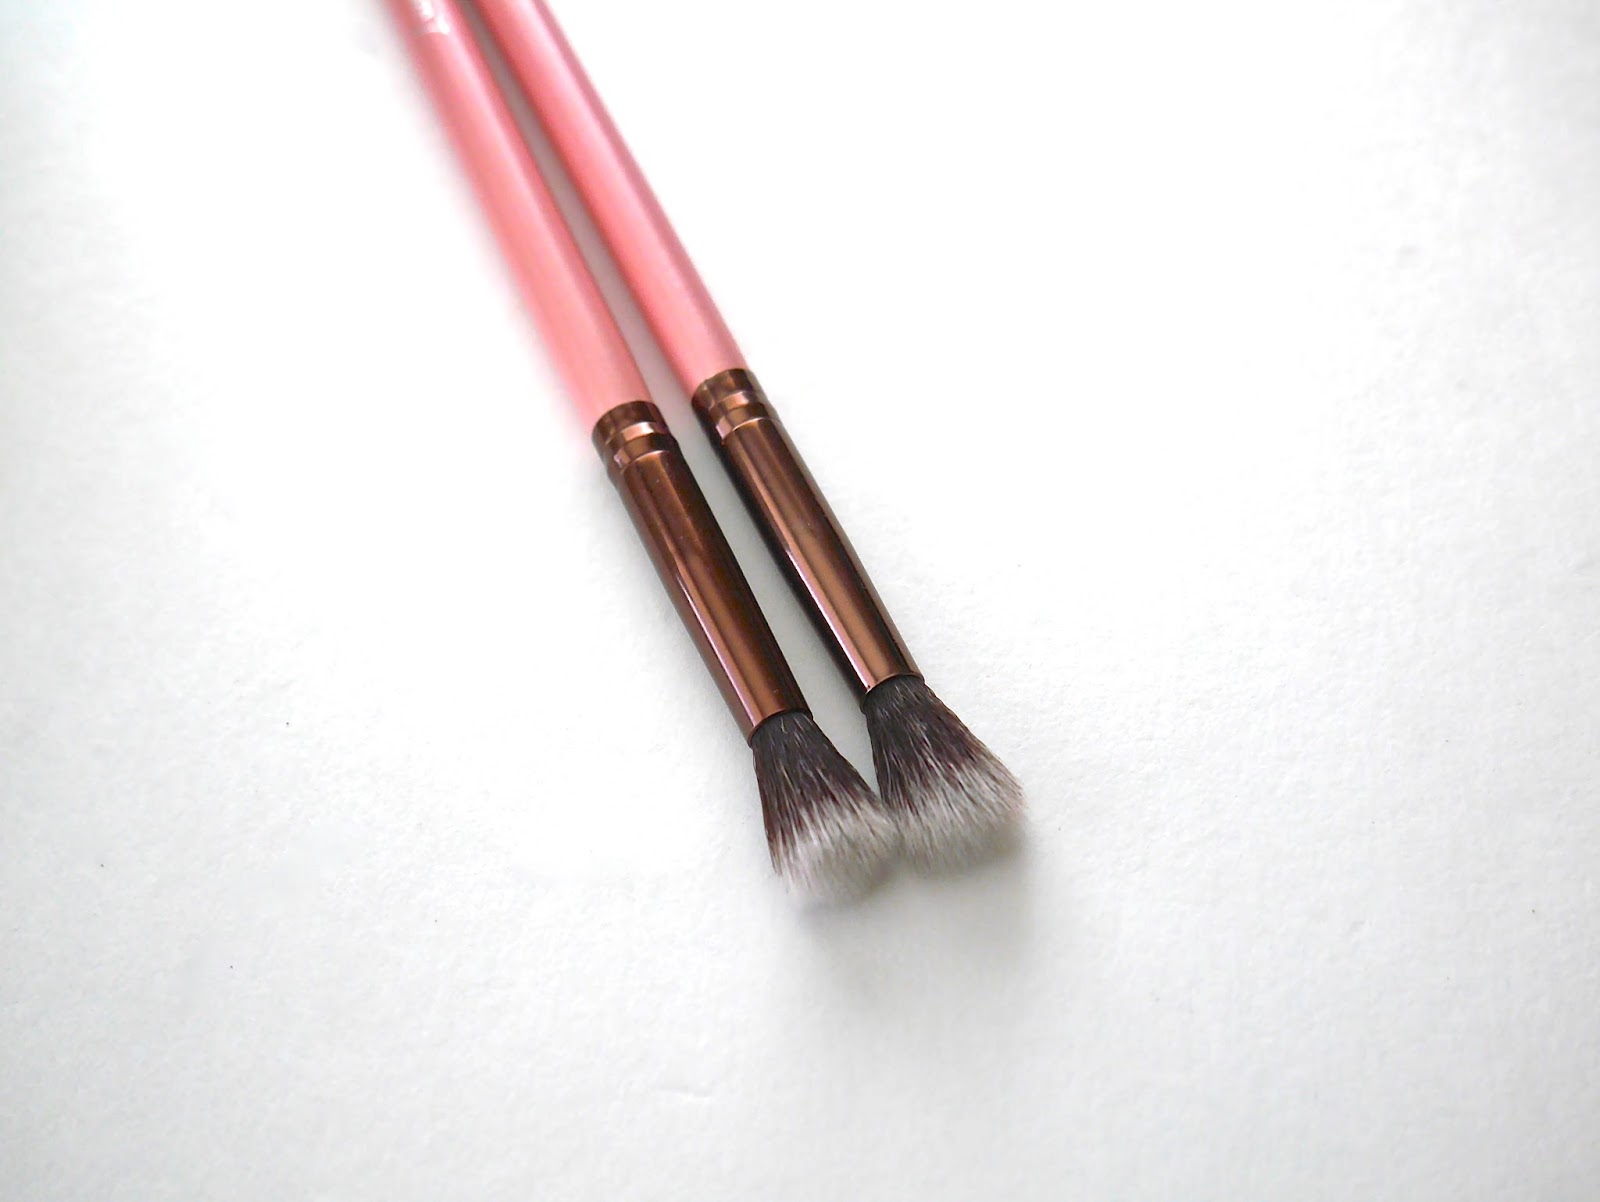 makeup brushes, cruelty free, vegan, eco-friendly, budget friendly